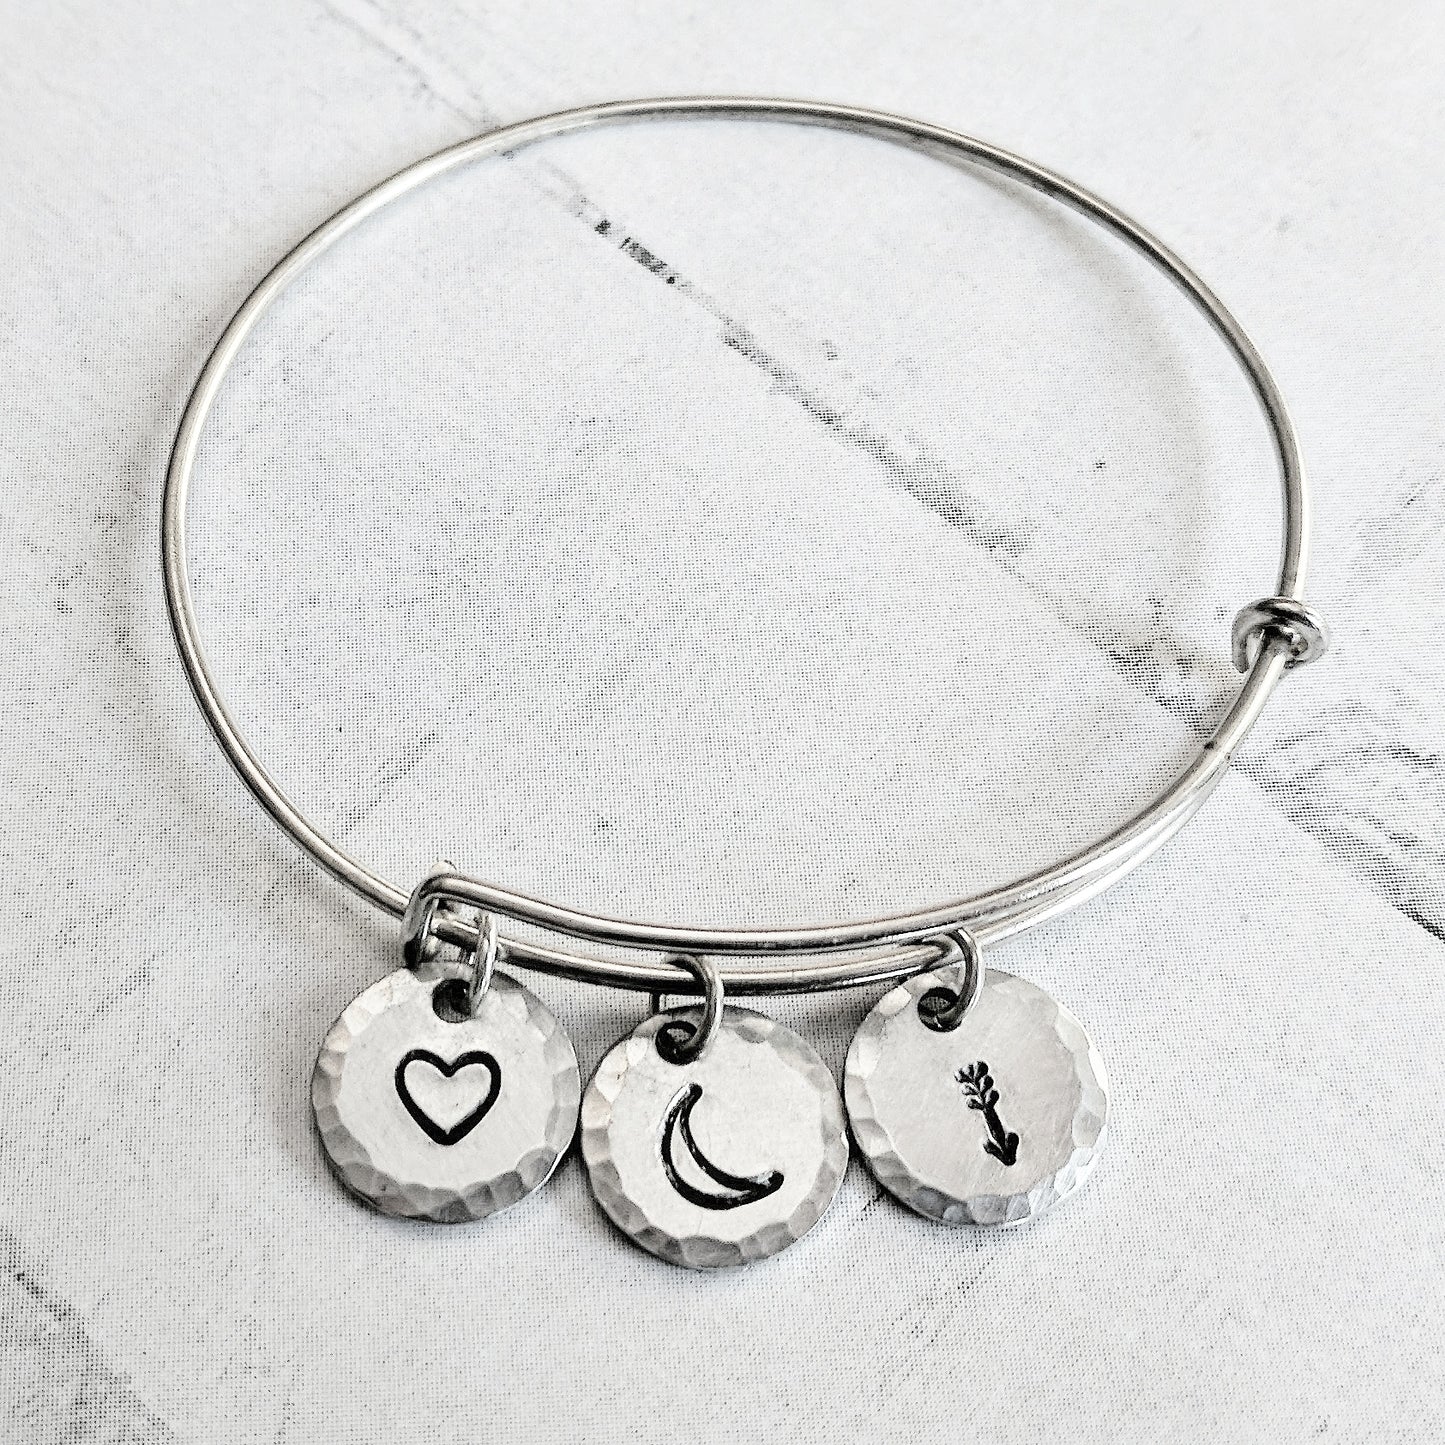 Love You to the Moon and Back Bangle Bracelet